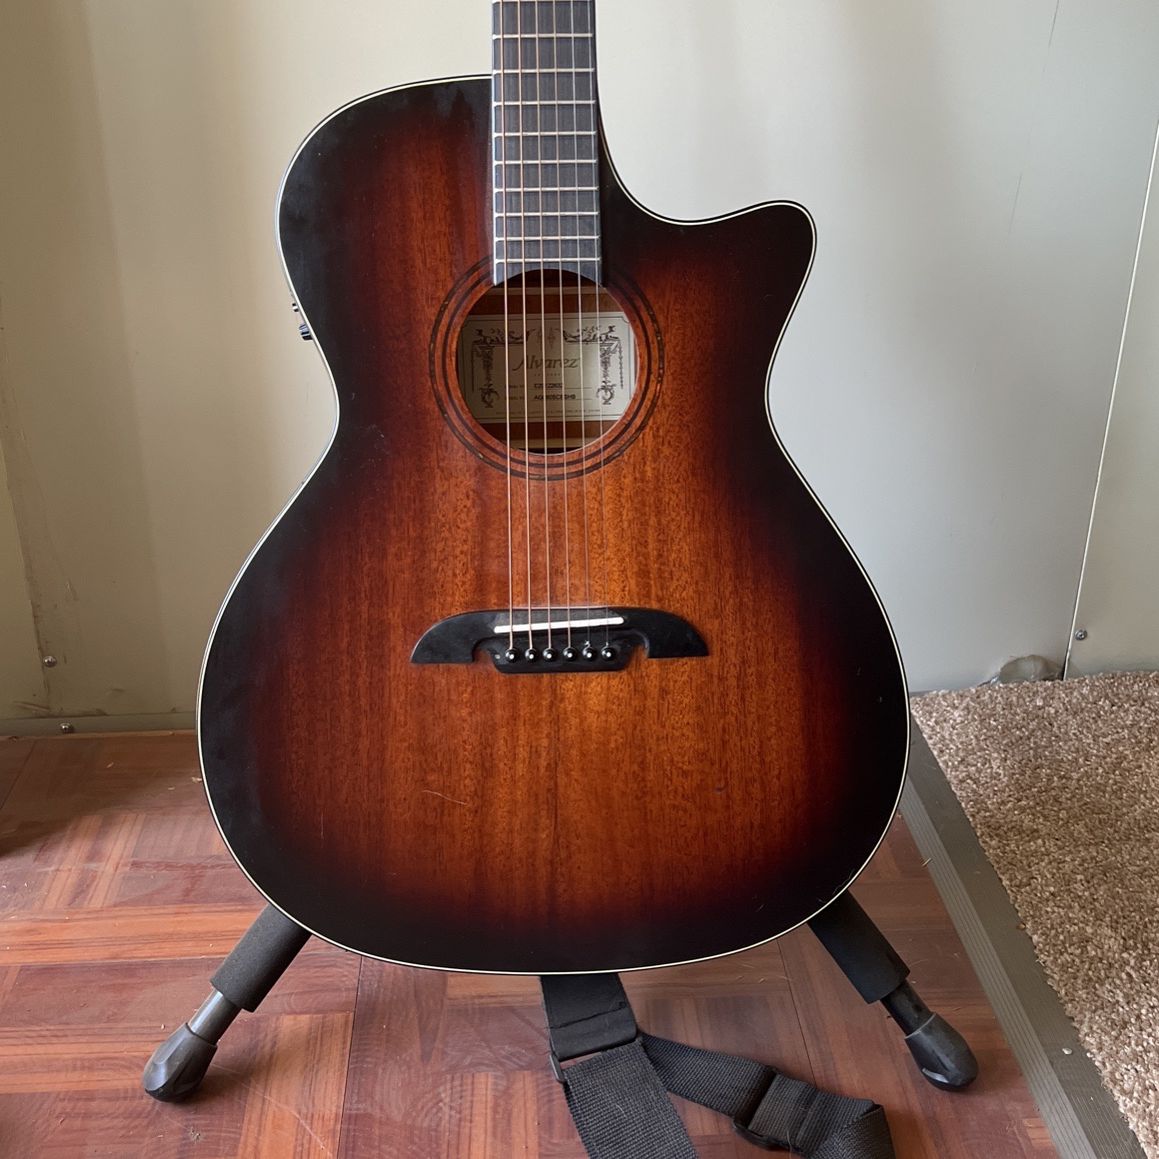 Alvarez Acoustic Electric Guitar, Built In Tuner. With Stand And Capo